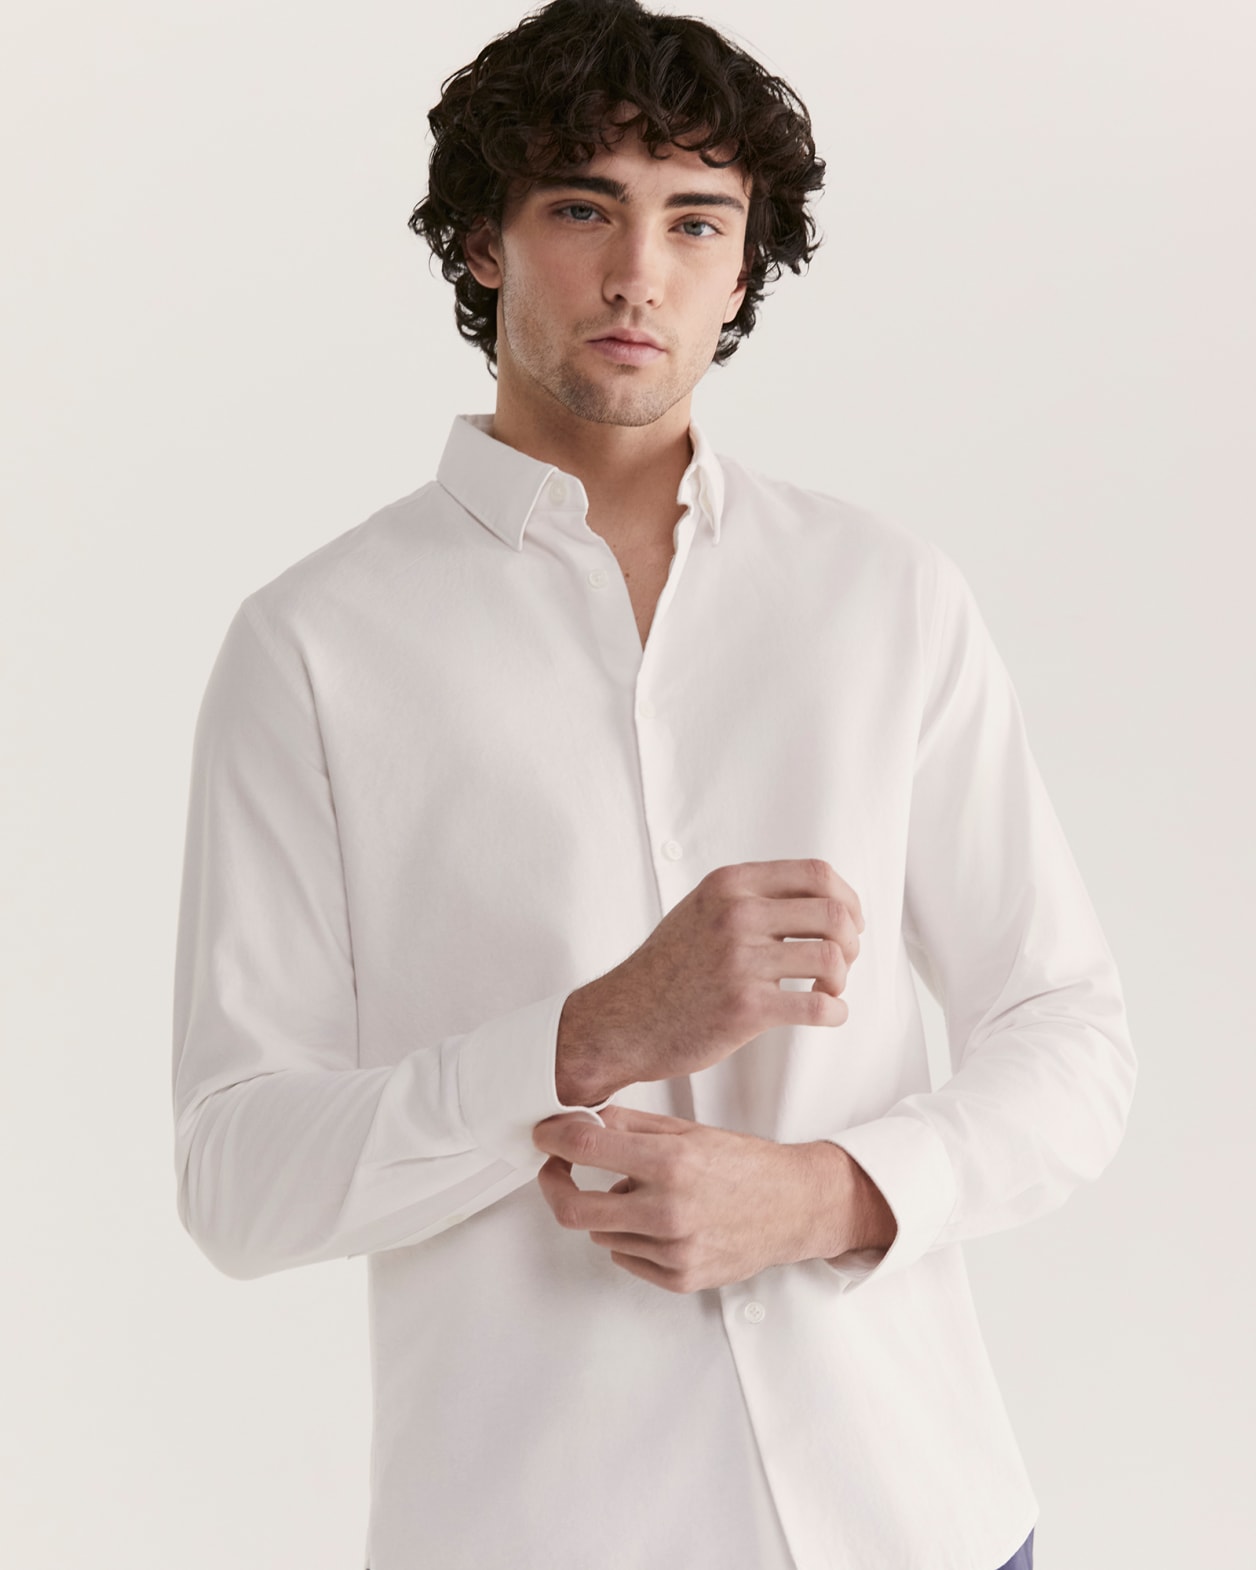 Christopher Oxford Long Sleeve Classic Shirt in WHITE